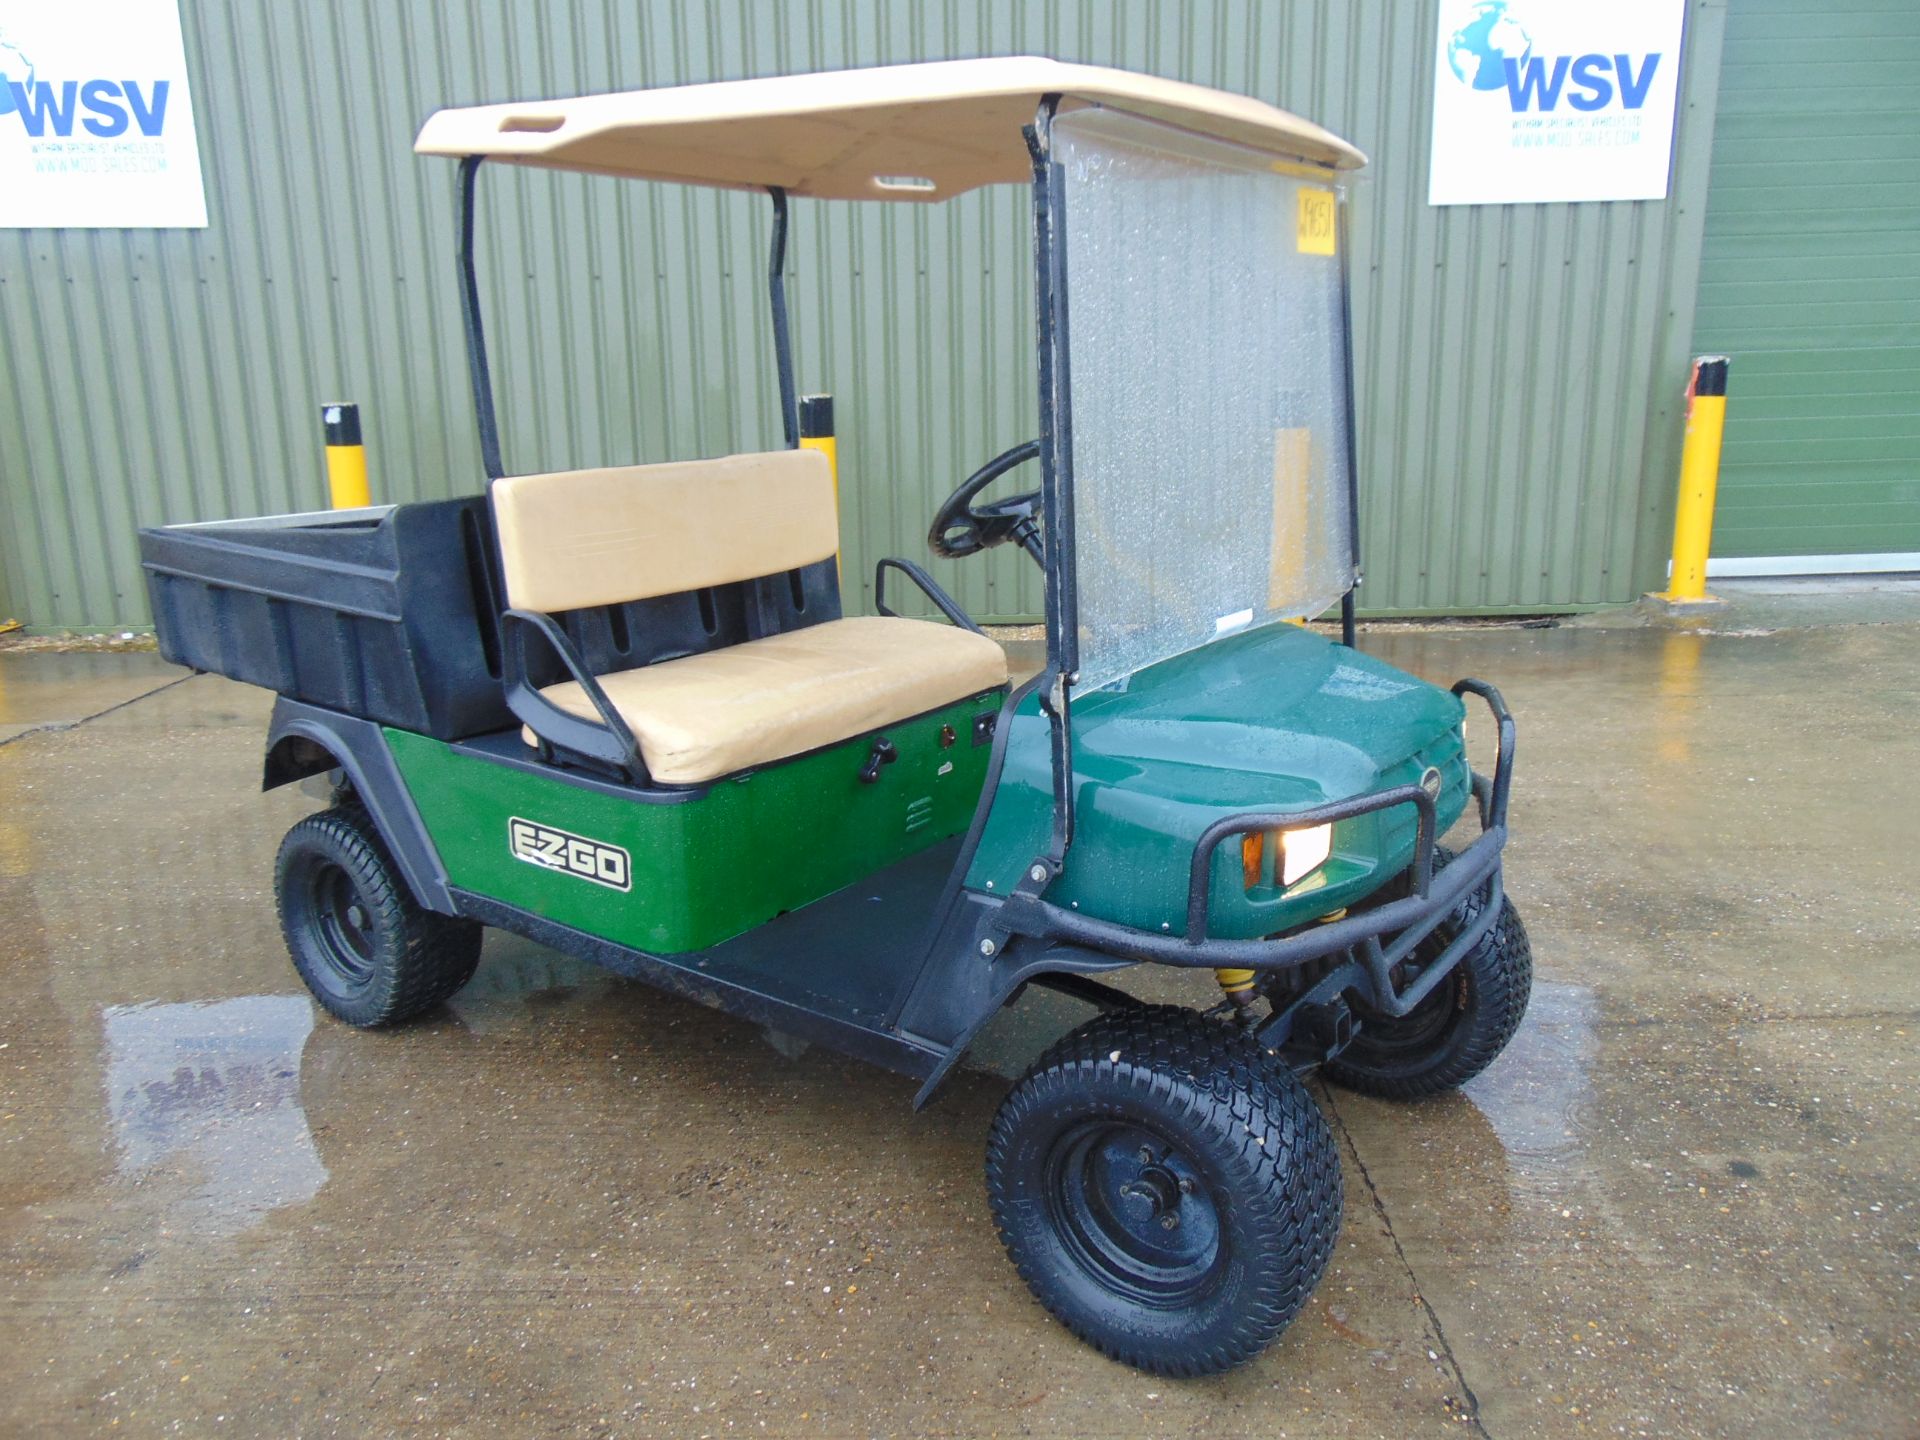 E-Z-GO Lifted Estate/Grounds Vehicle c/w Tipping Rear Body Only 889 Hours!